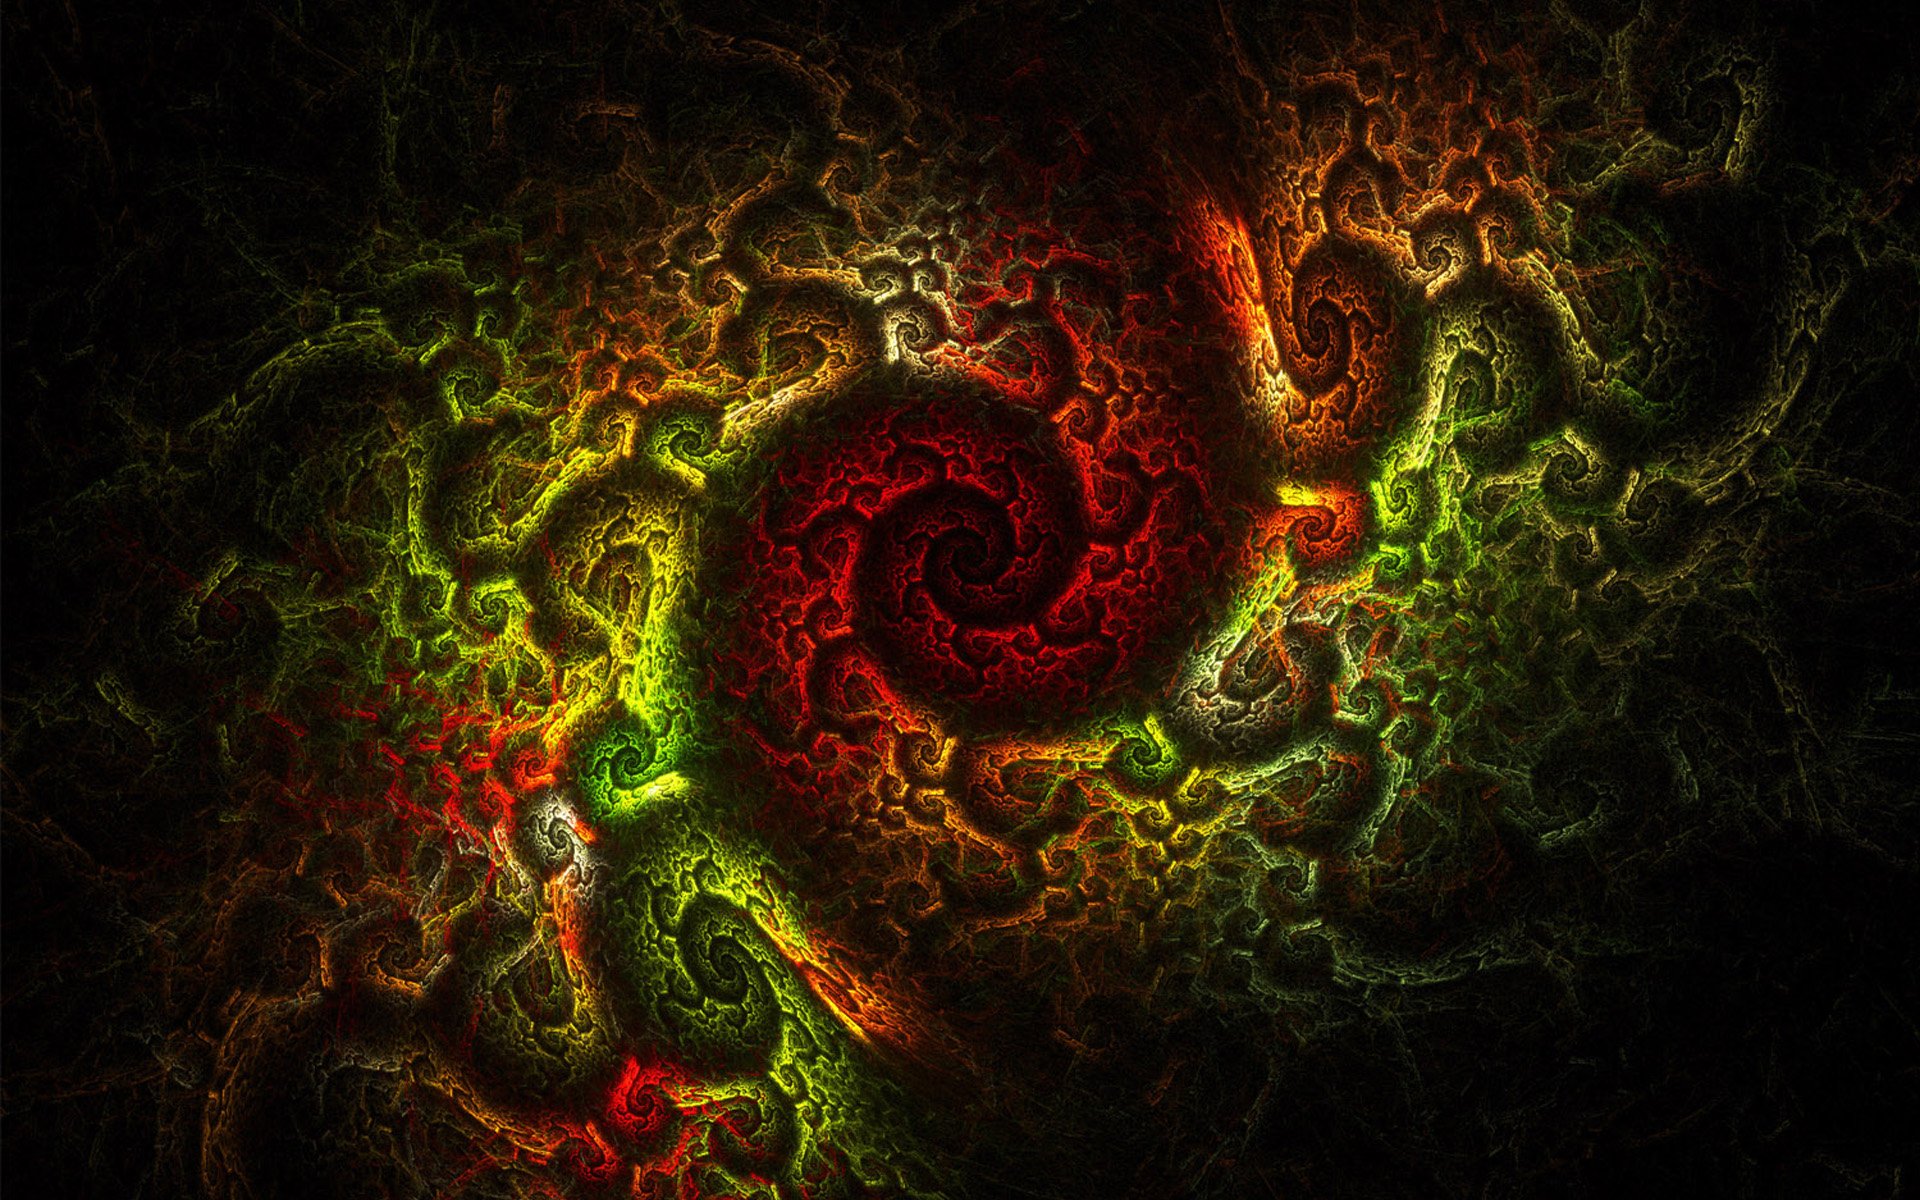 texture, pattern, colors, shapes, cool, fractal, abstract 32K